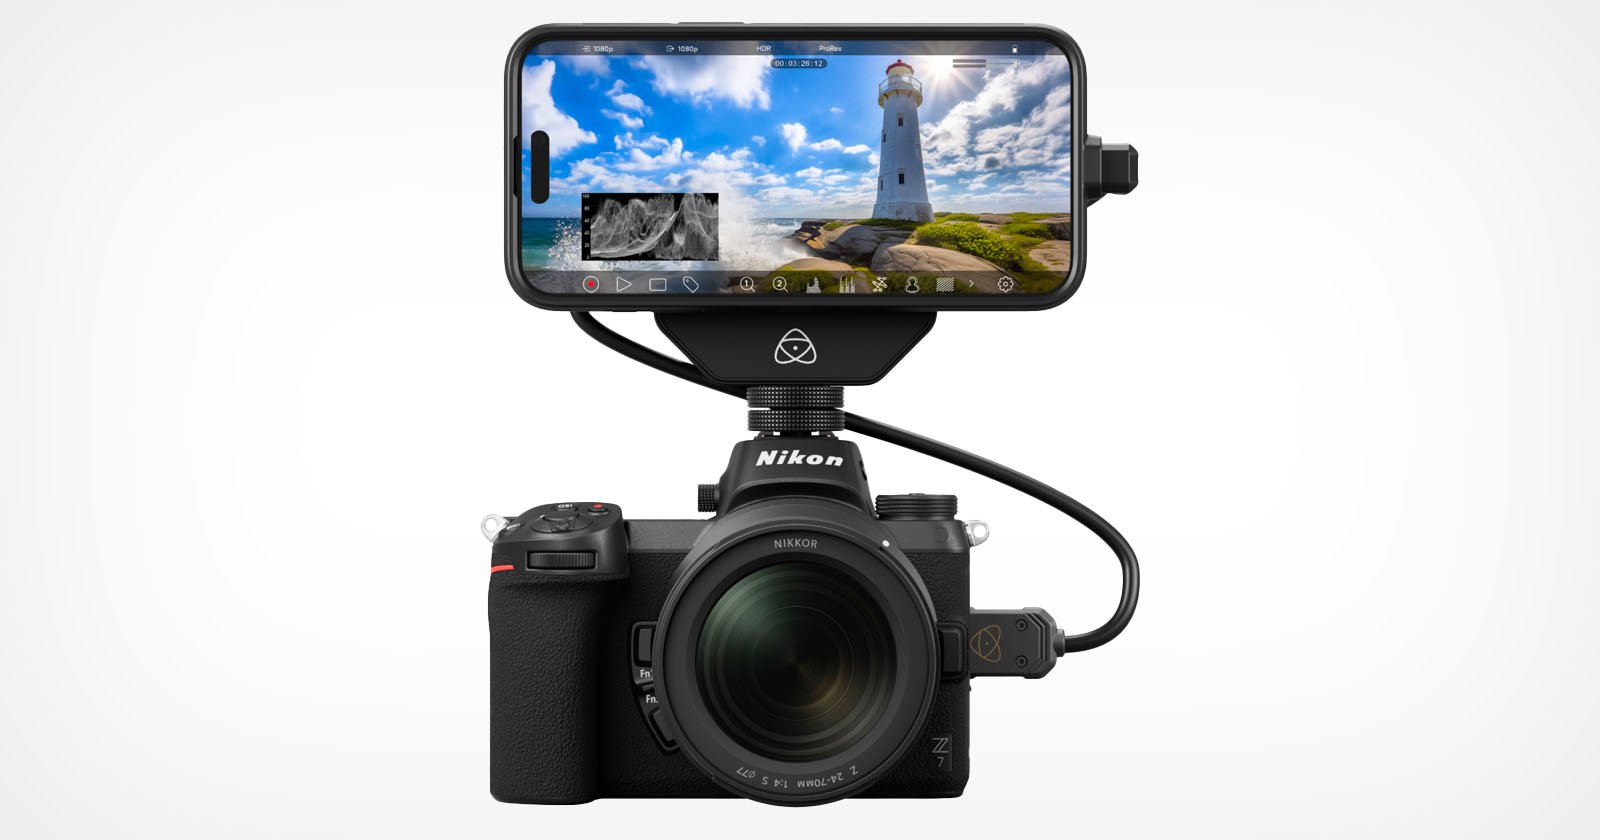 Atomos Ninja Phone Turns Your iPhone into a Monitor and ProRes Recorder